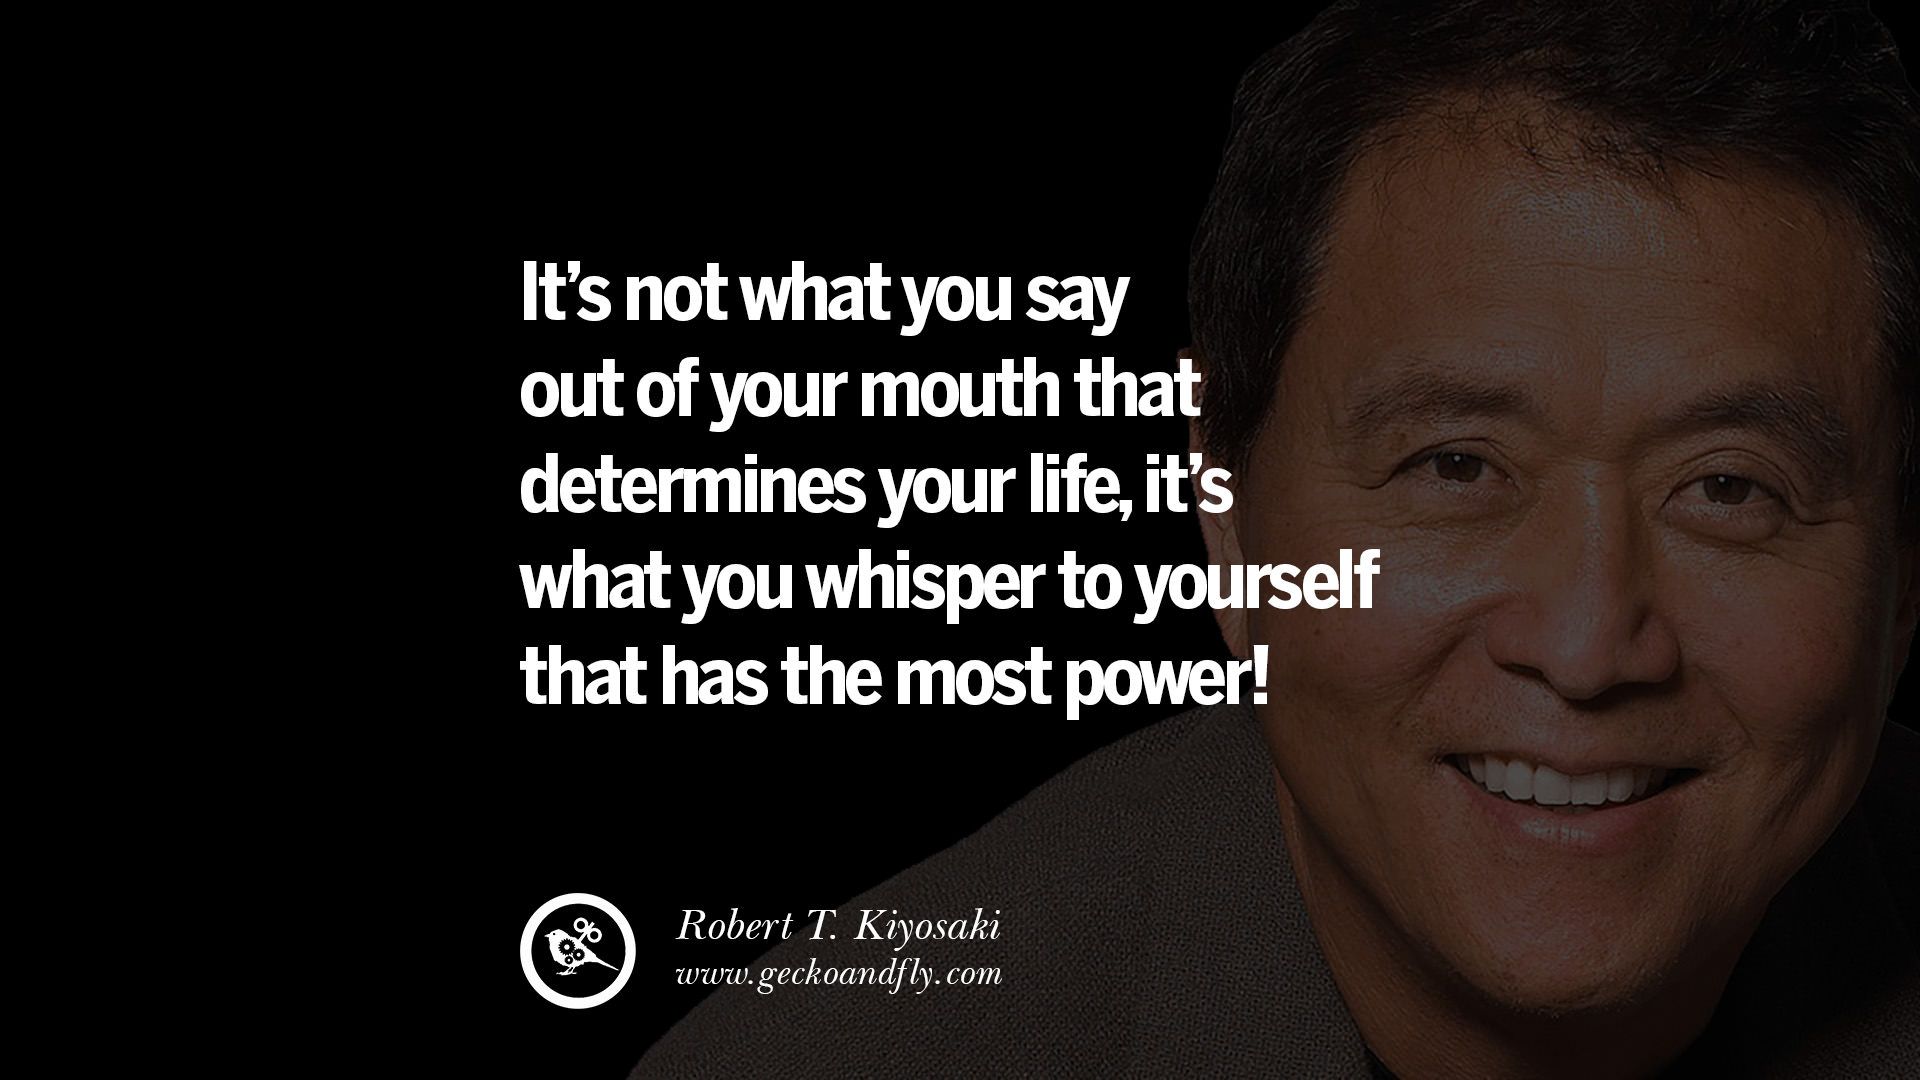 Robert Kiyosaki Quotes From Rich Dad Book On Investing, Network